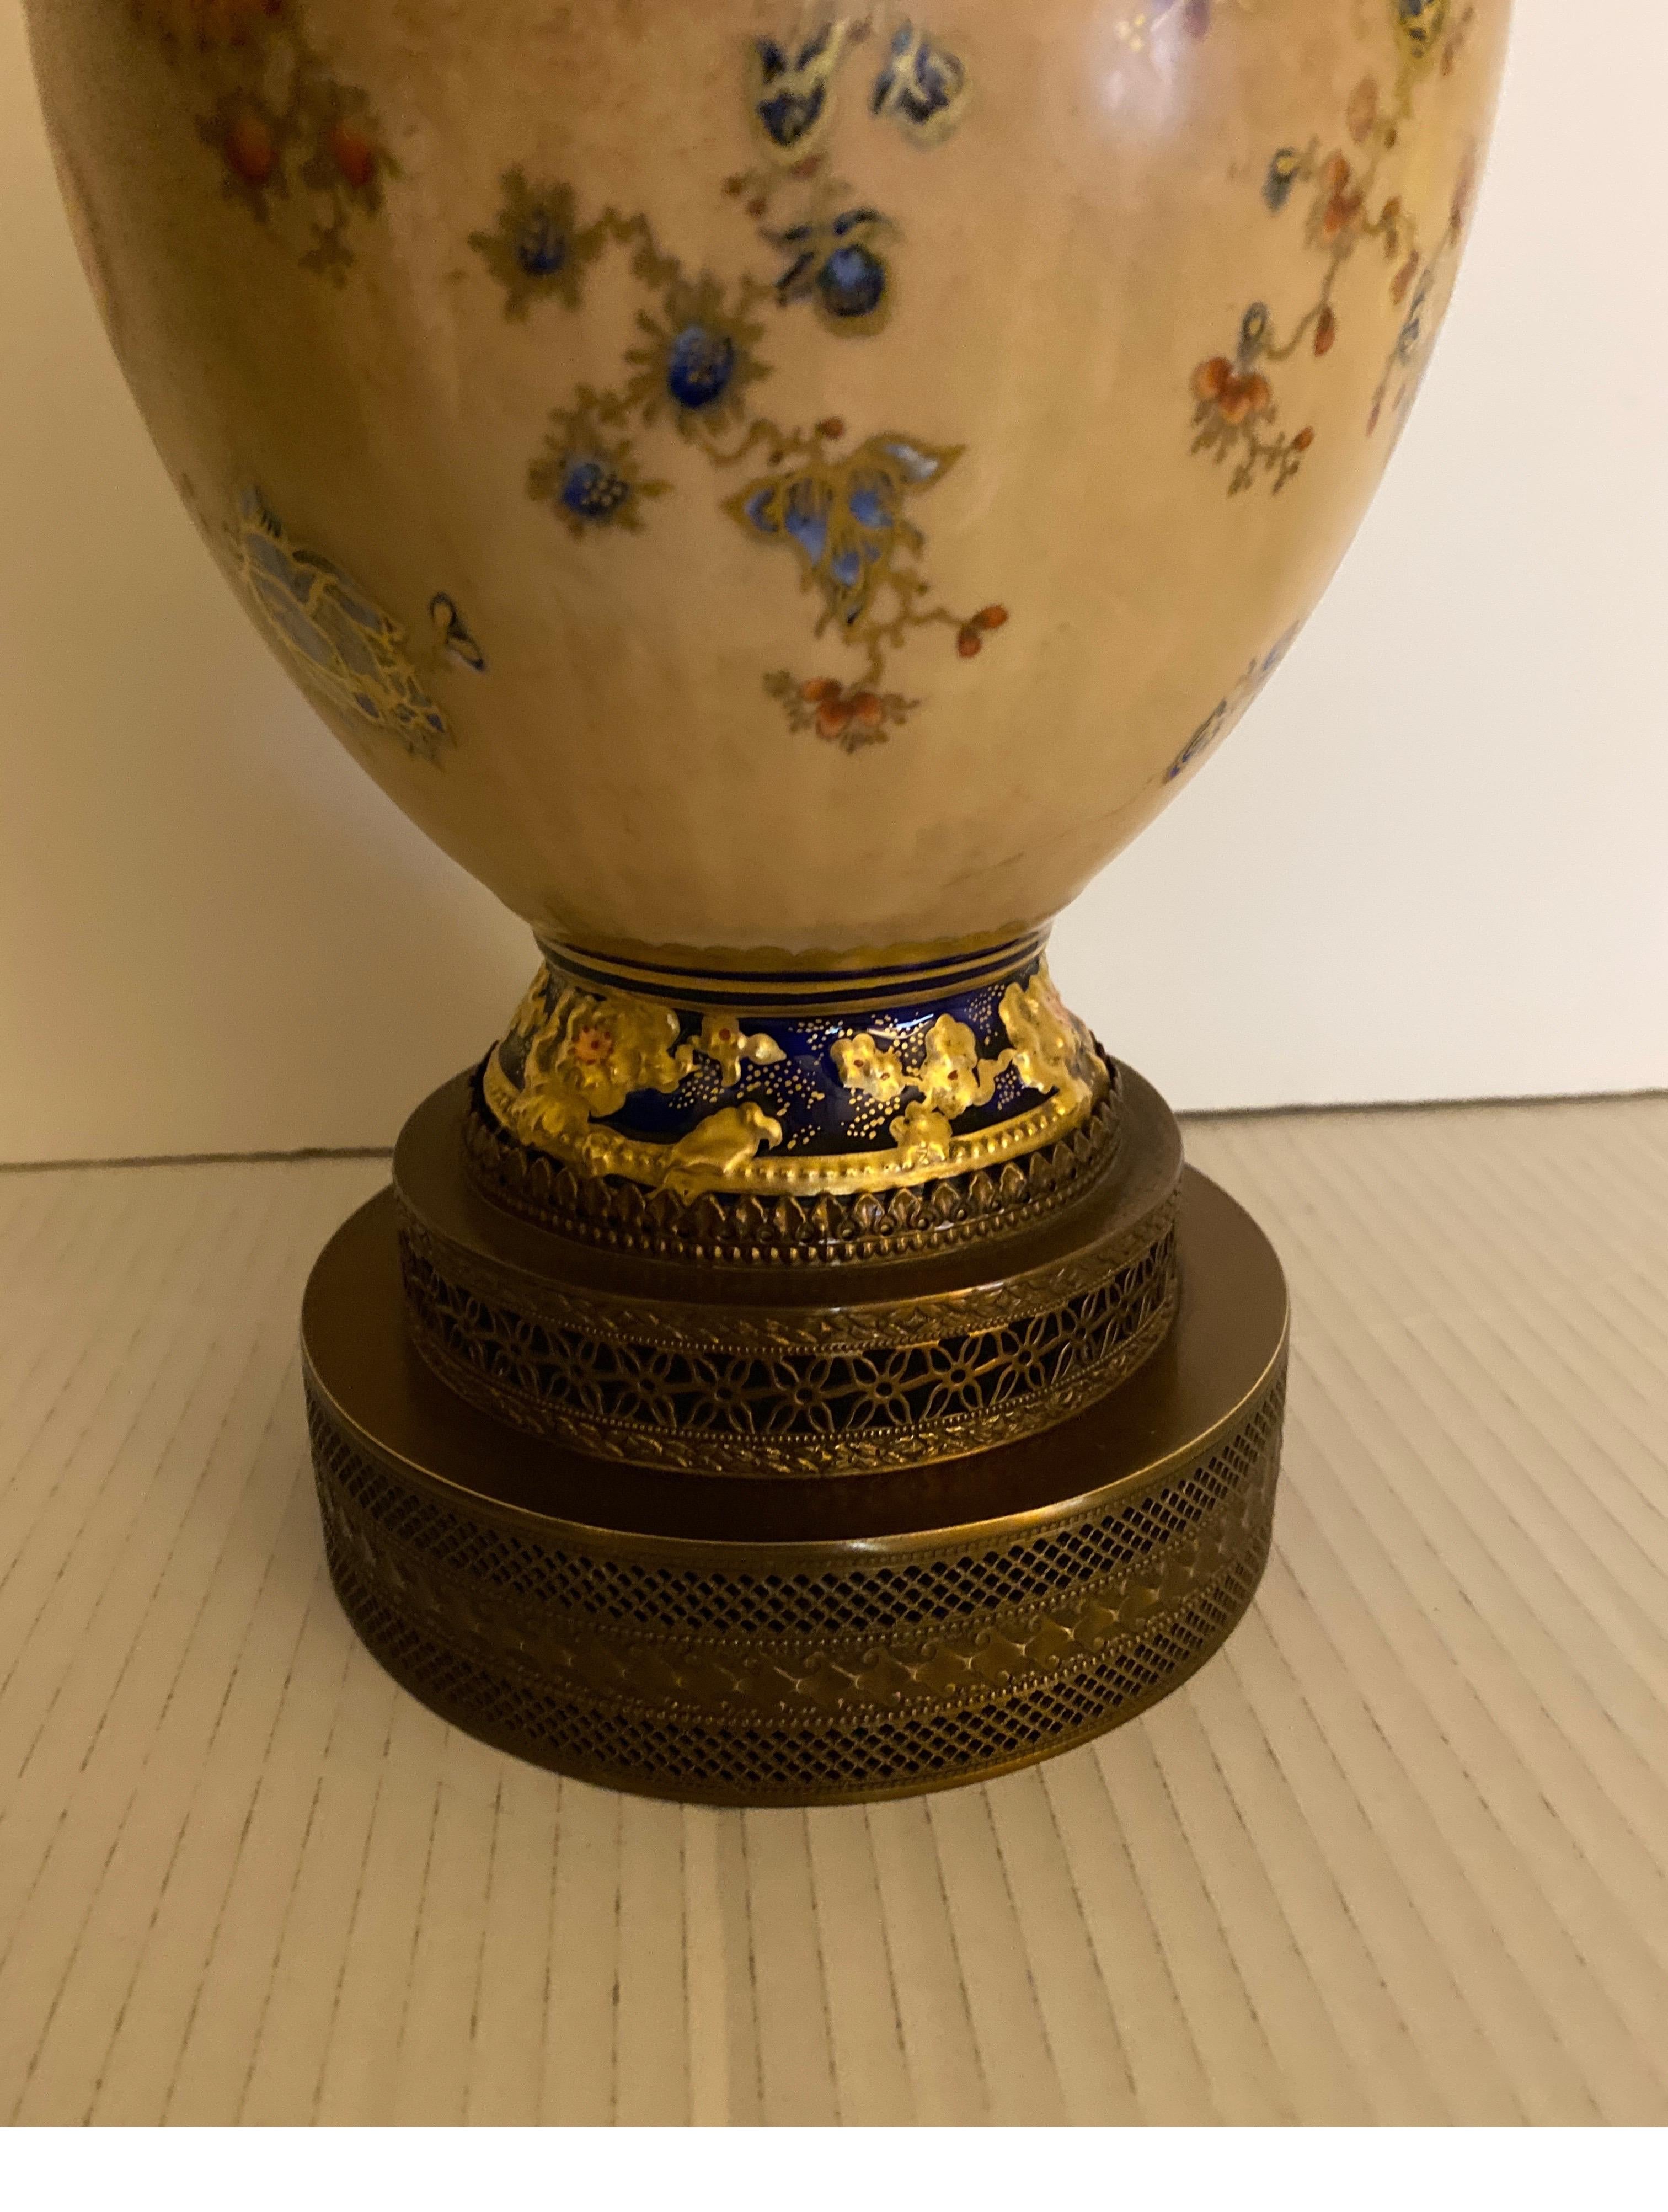 Elegant Cobalt and Gold Encrusted 19th Century Royal Crown Derby Lamp In Excellent Condition For Sale In Lambertville, NJ